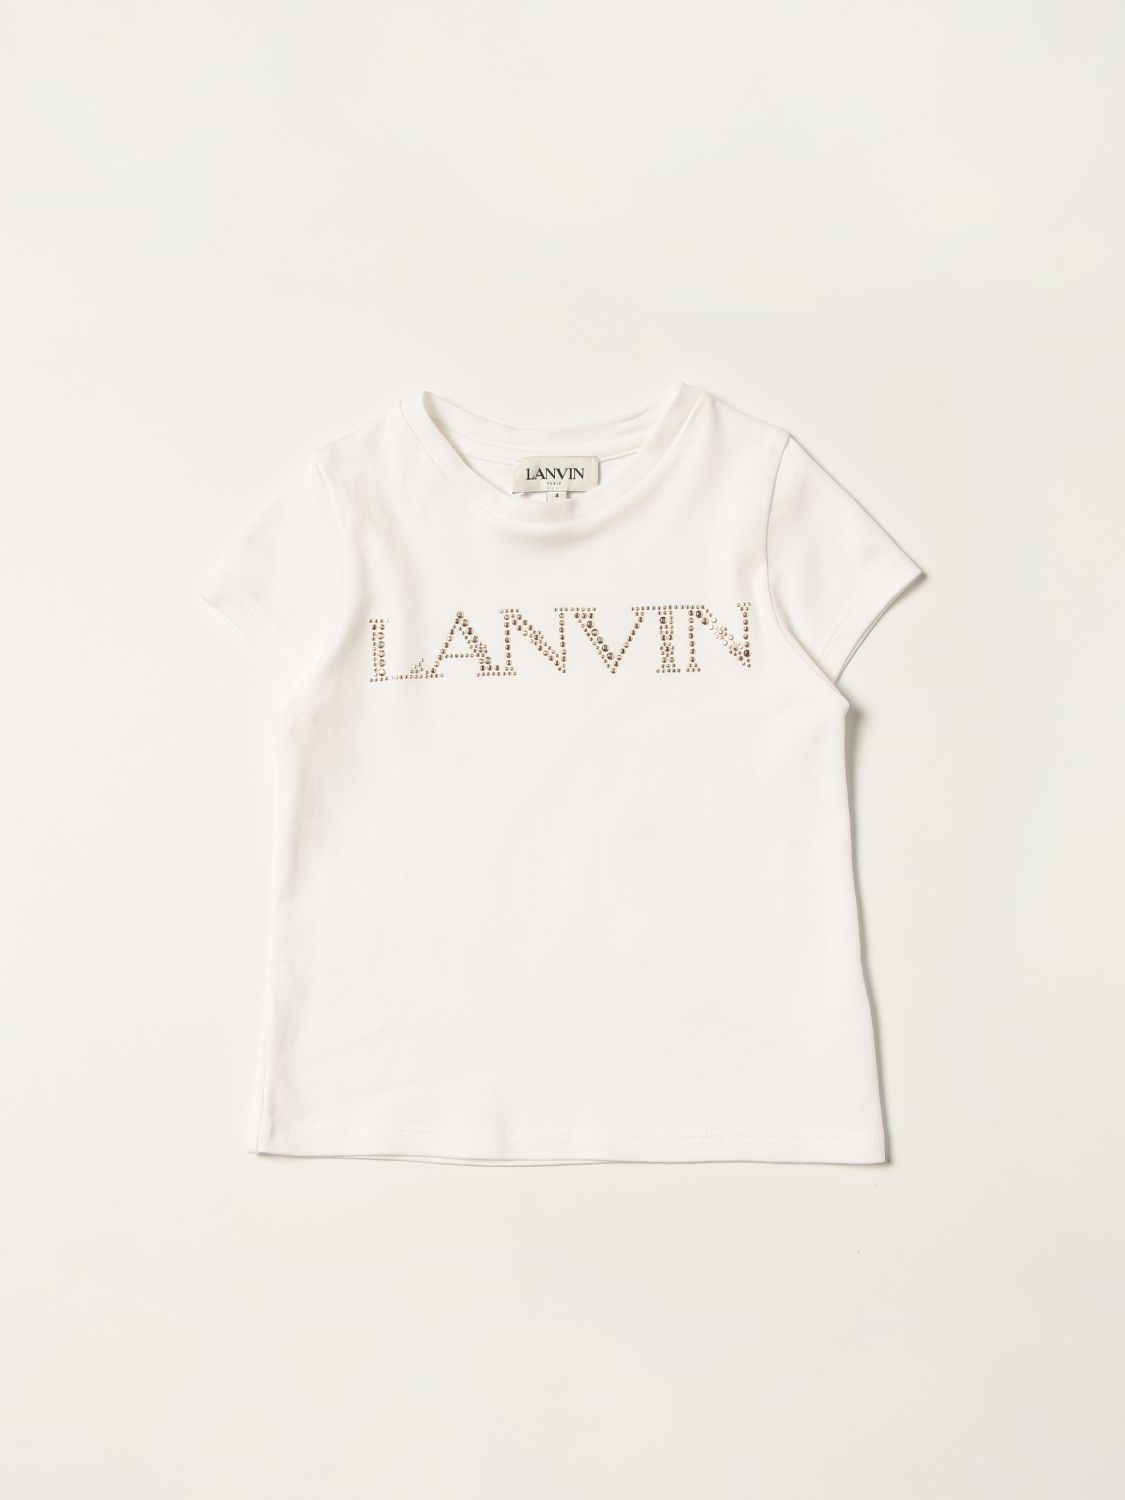 Lanvin Kids' T-shirt  Kinder Farbe Weiss In White